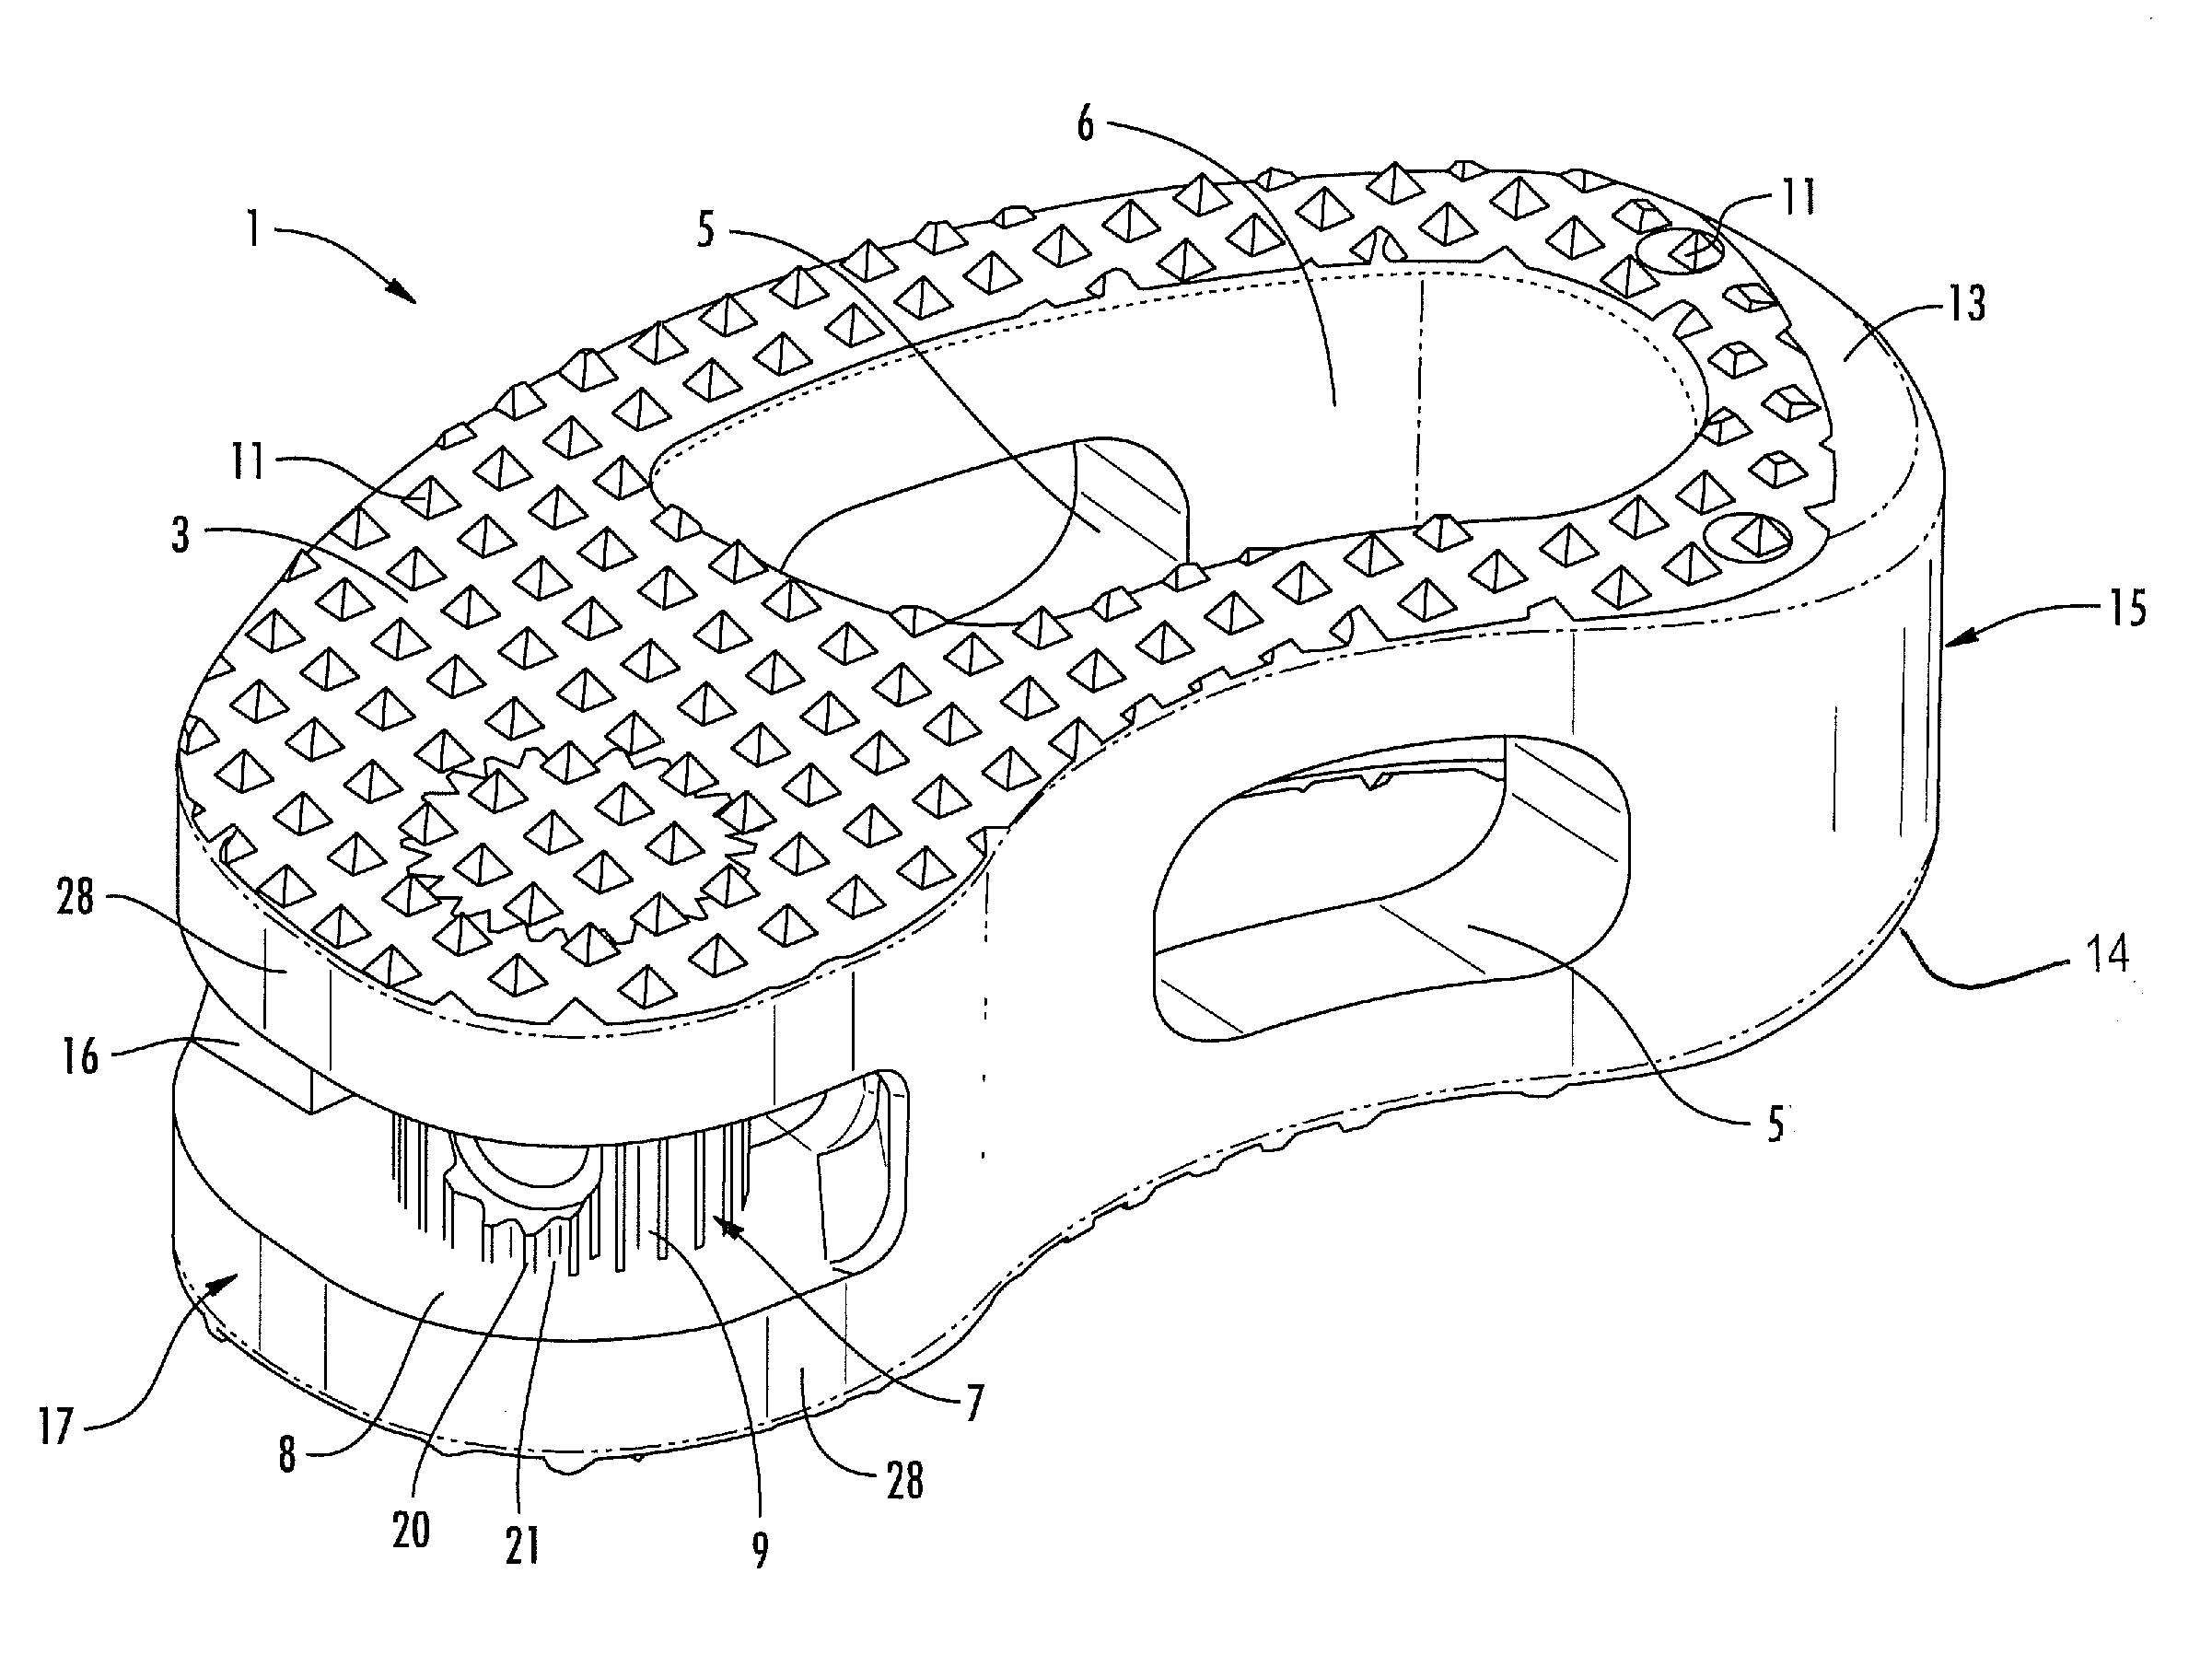 Intervertebral implant for the fusion between two vertebral bodies of a vertebral column and corresponding positioning instrument